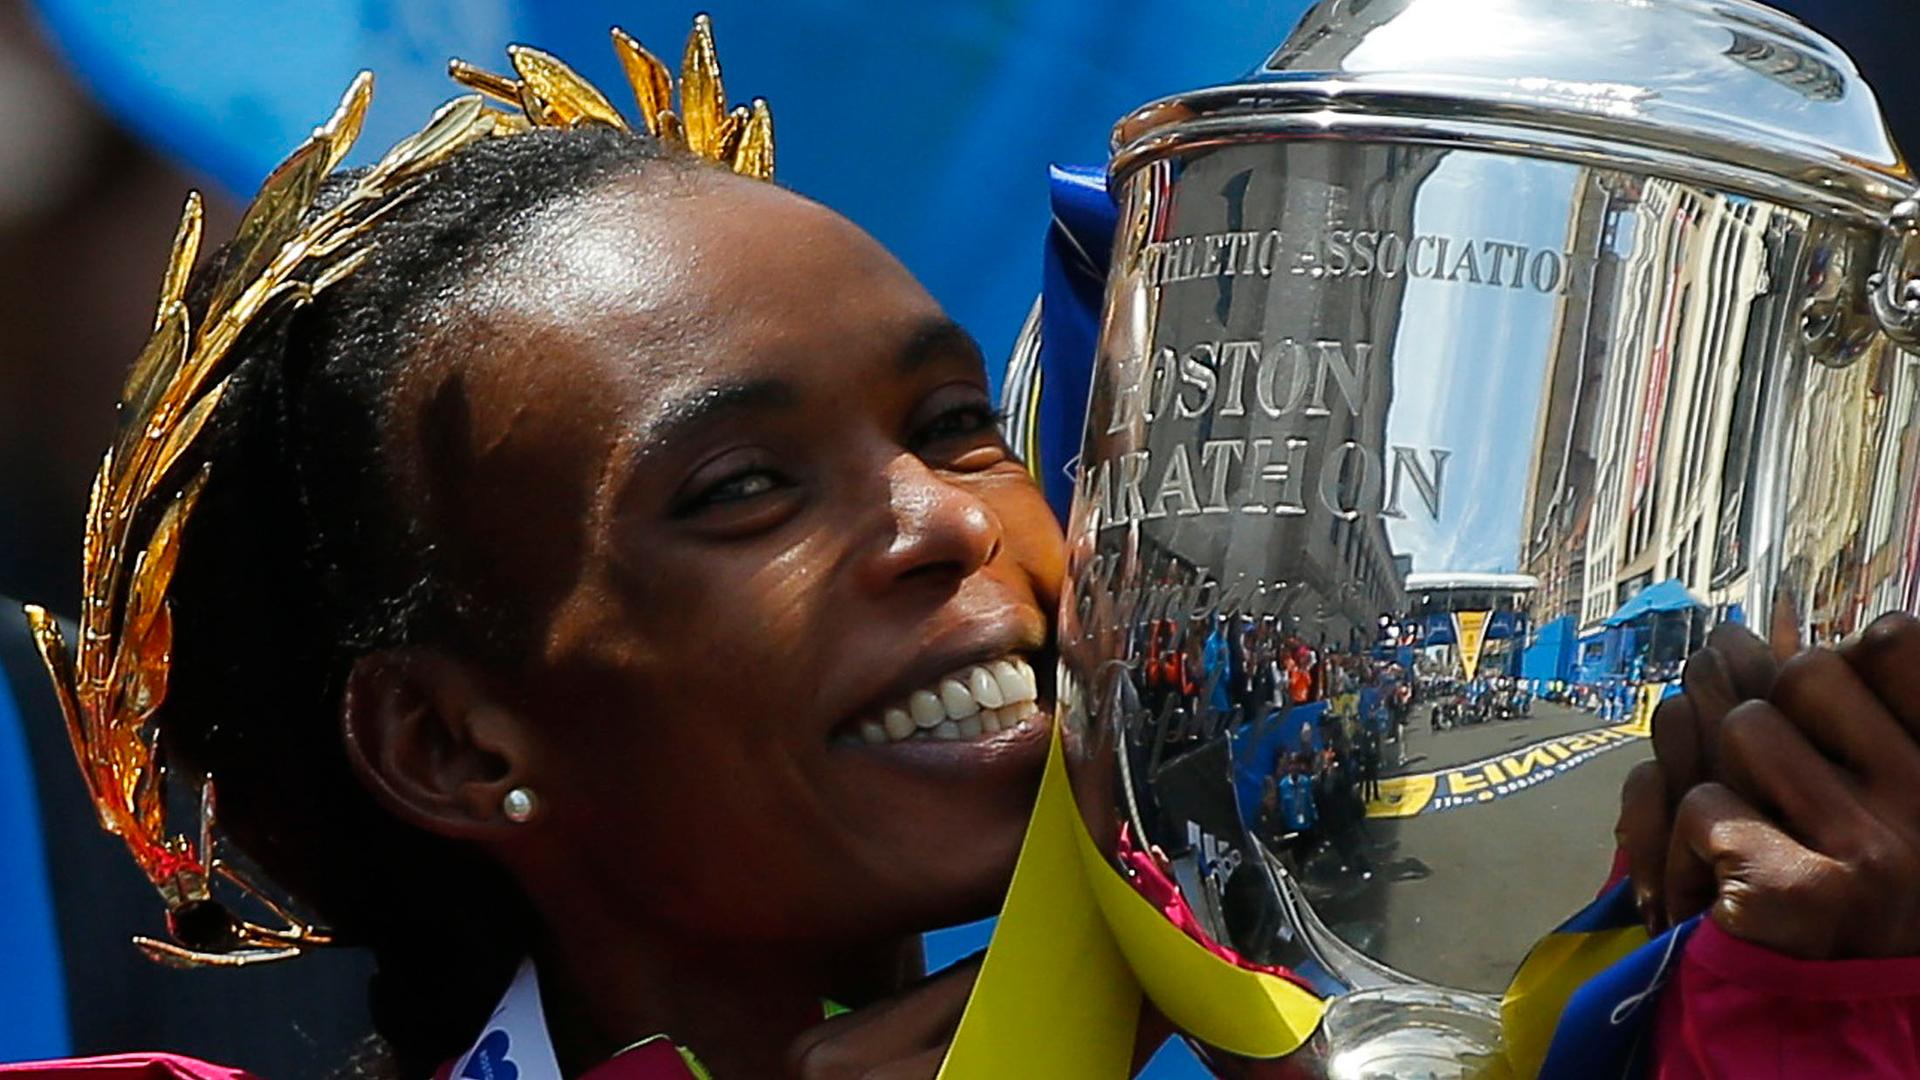 Kenya's Rita Jeptoo reacts after winning the women's division at the 118th running of the Boston Marathon in Boston, Massachusetts April 21, 2014. Jeptoo, winner of the Boston and Chicago Marathons for the last two years, has failed an out-of-competition 